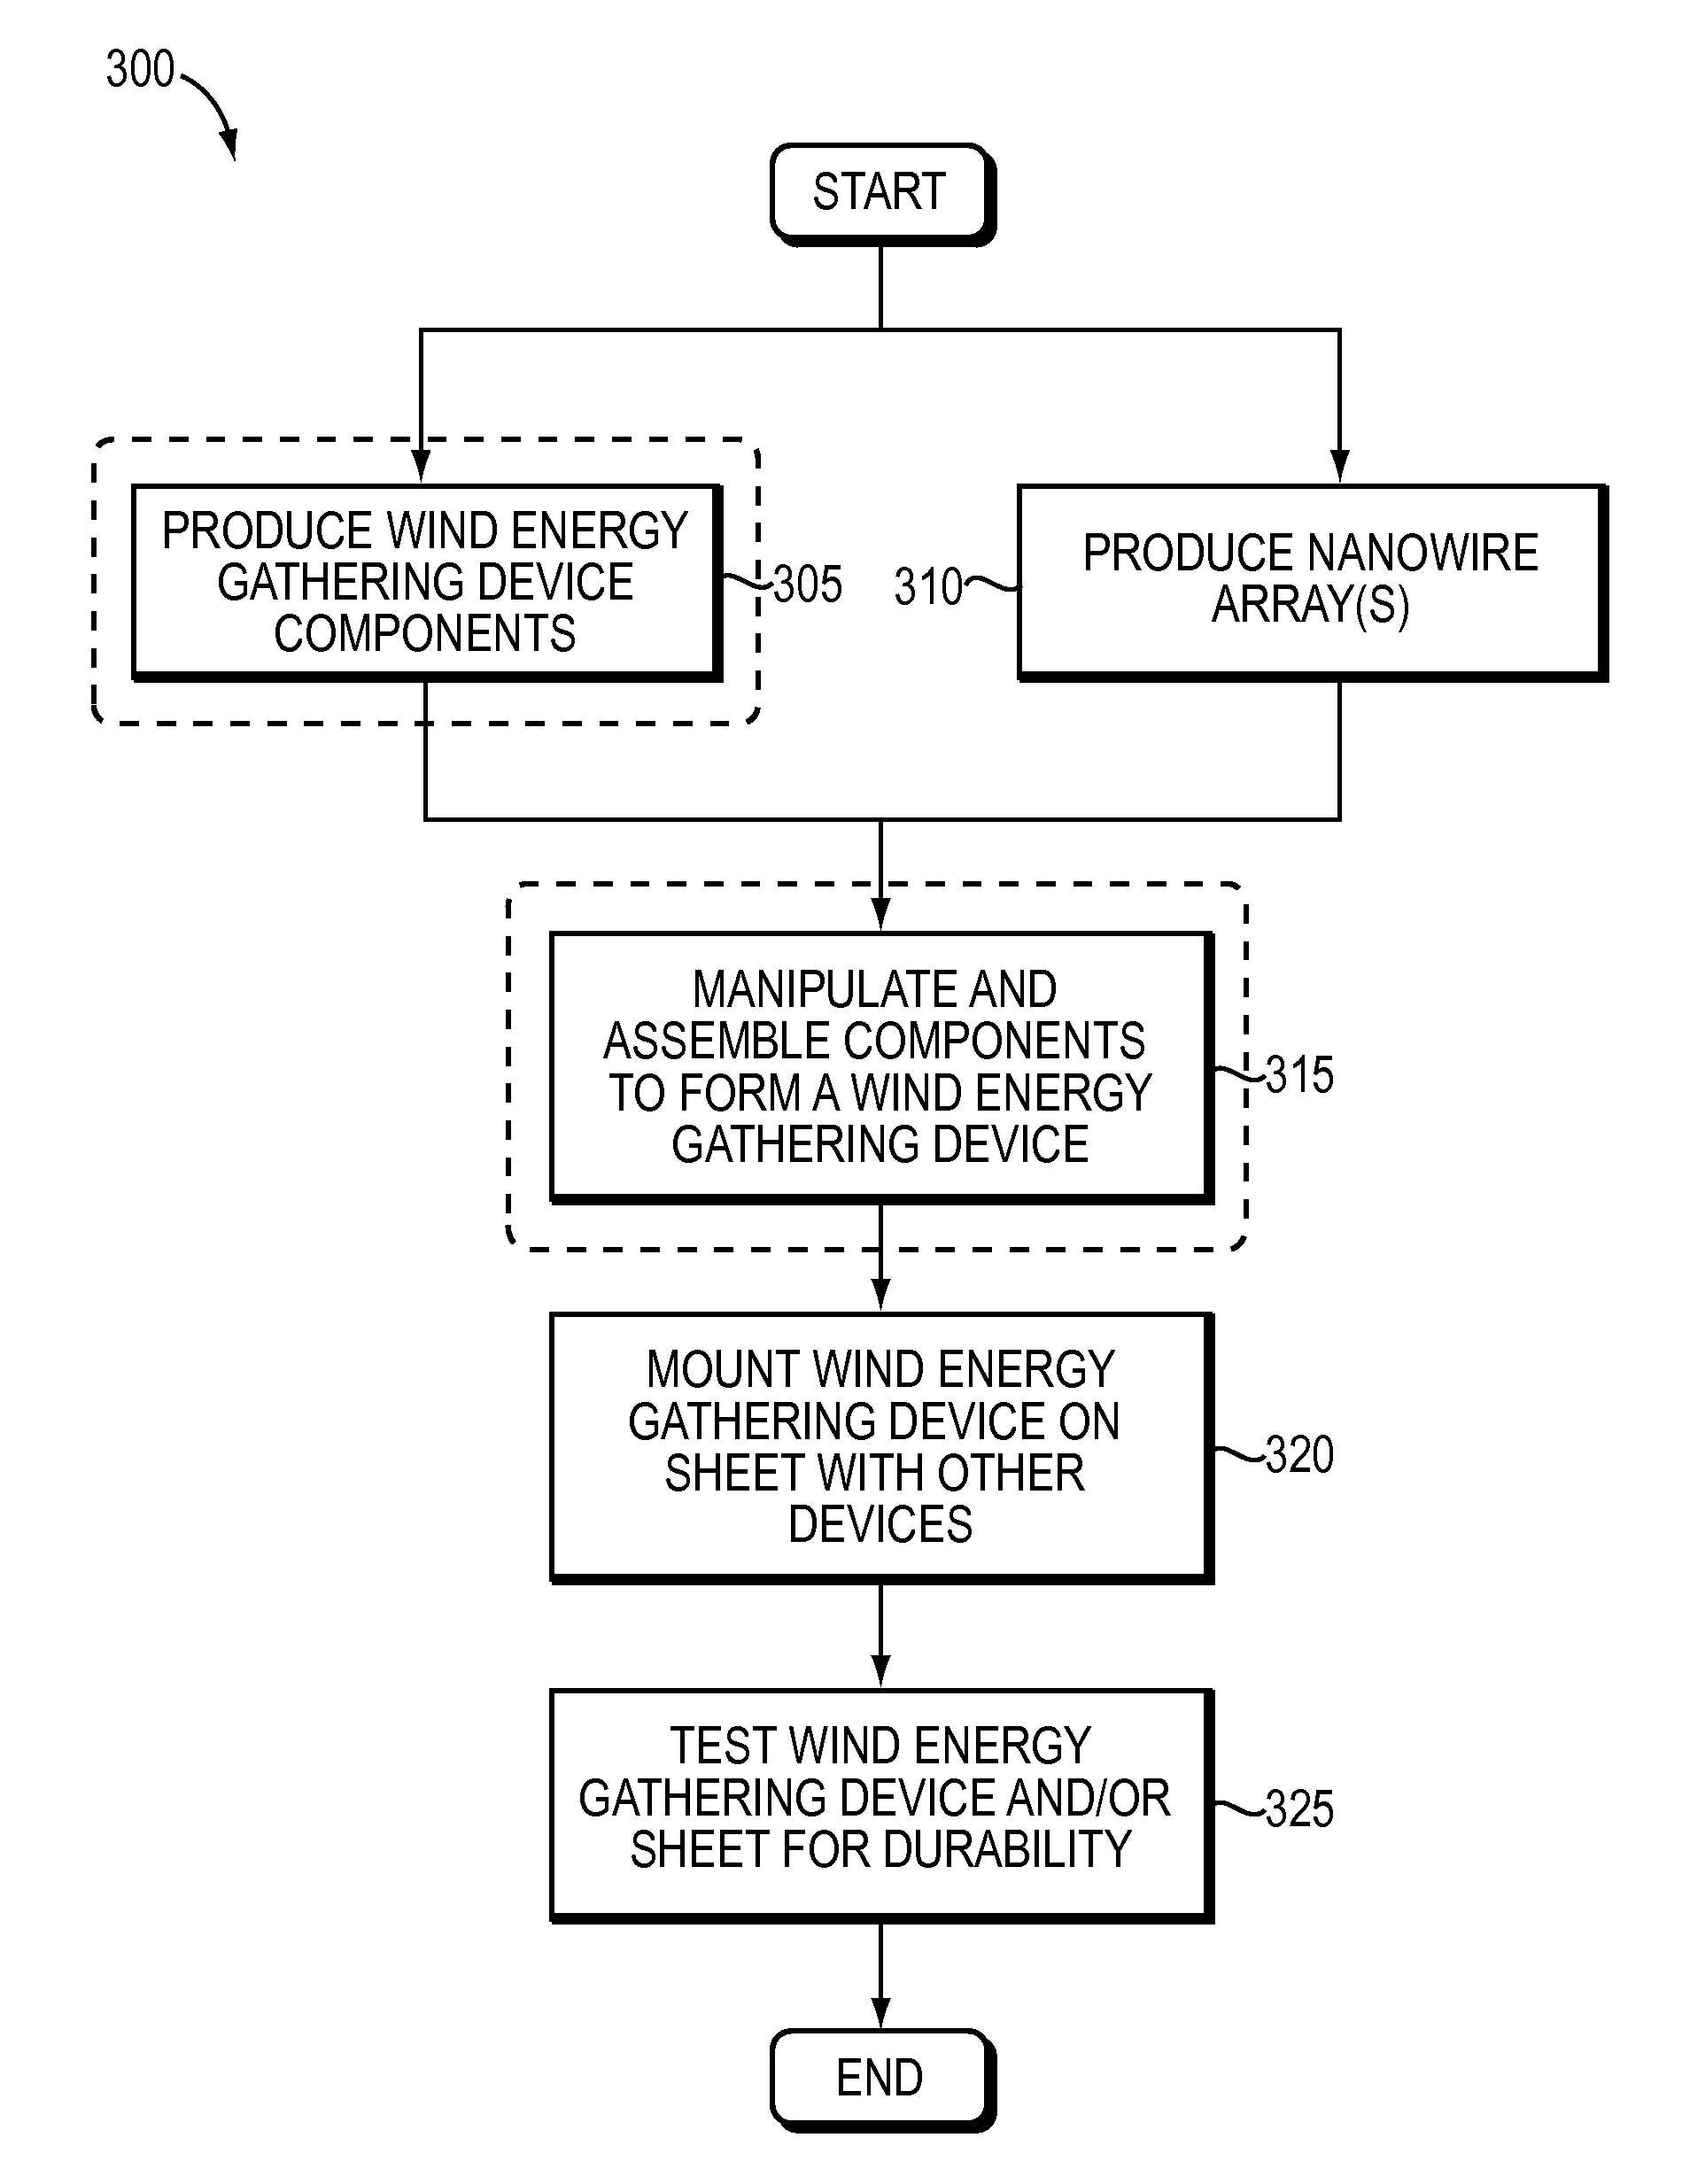 Method for creating micro/nano wind energy gathering devices